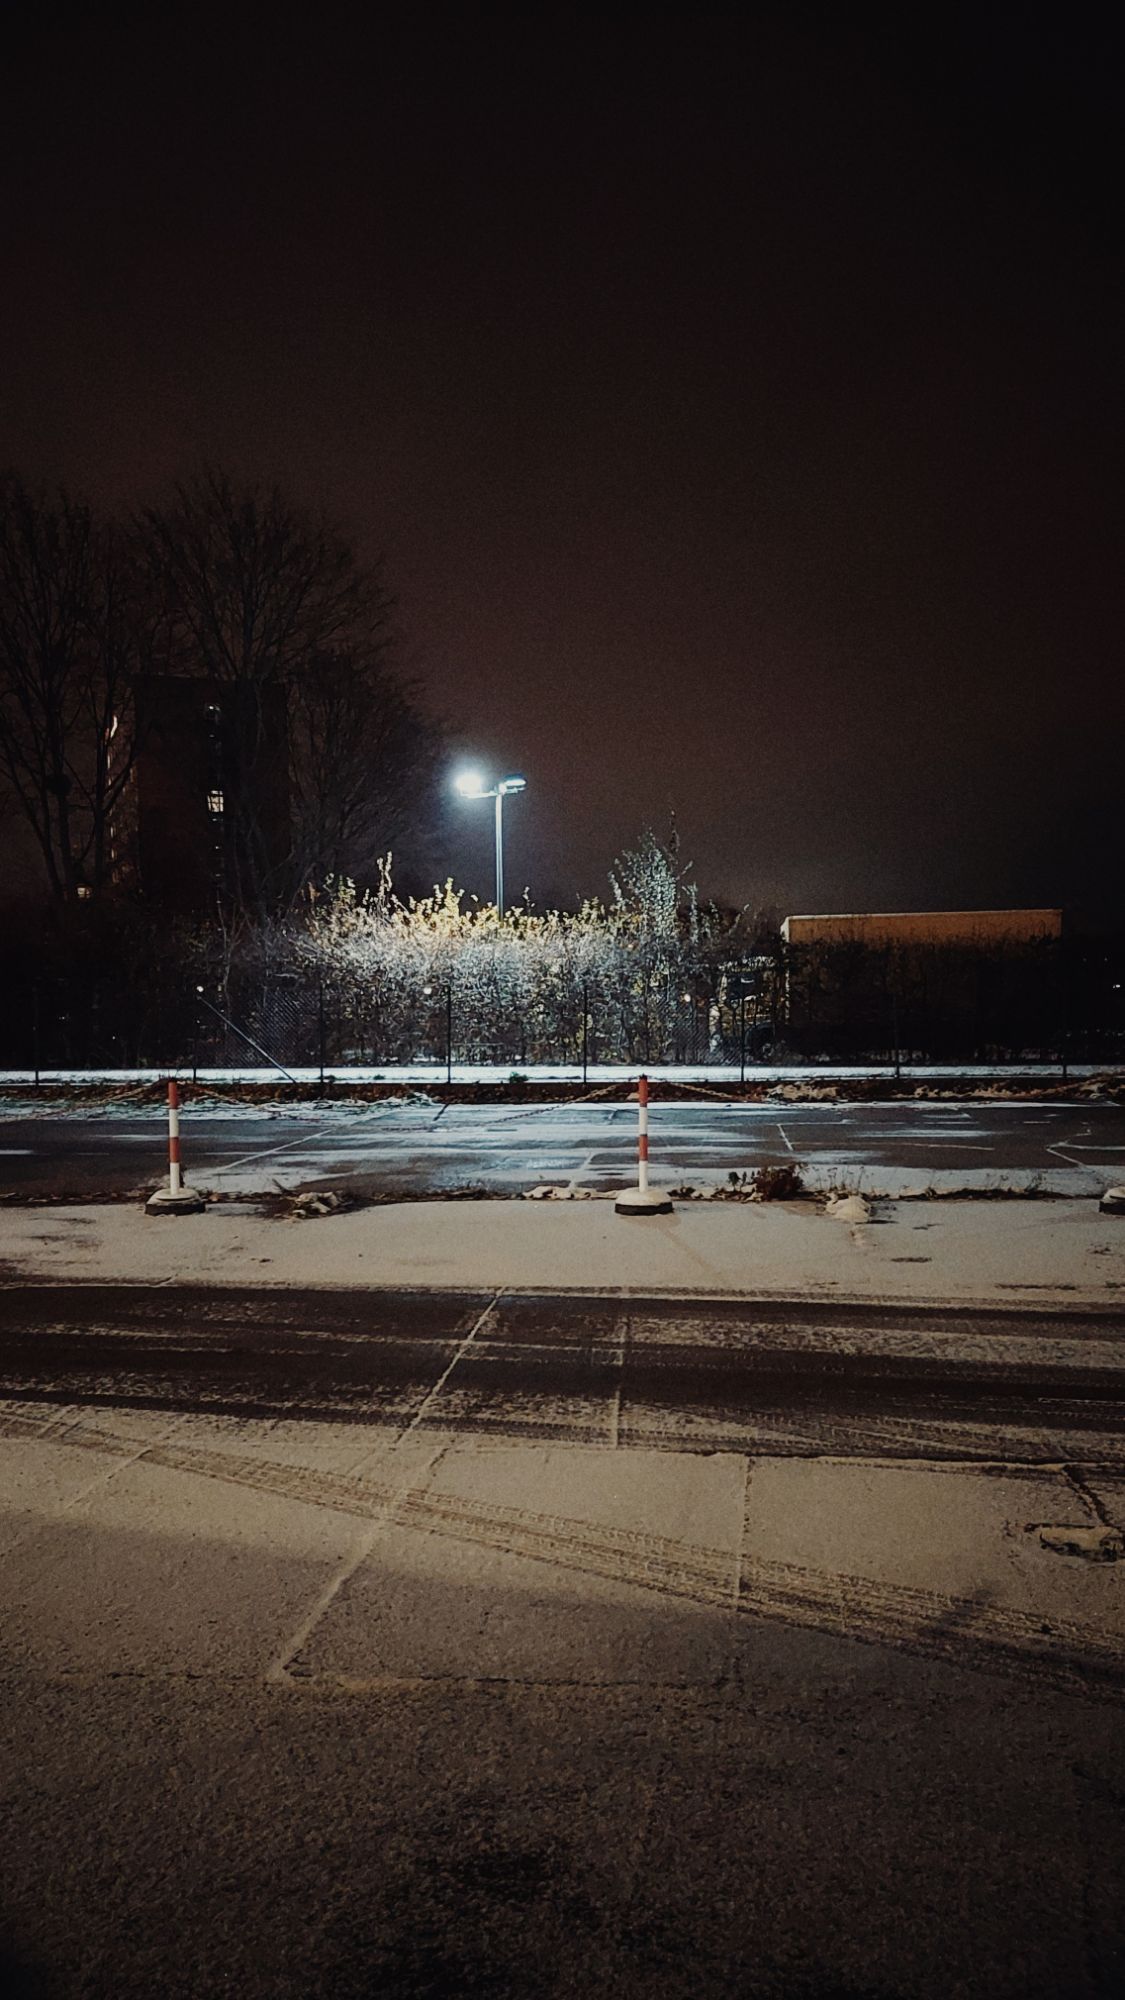 An empty parking lot, partially under snow.